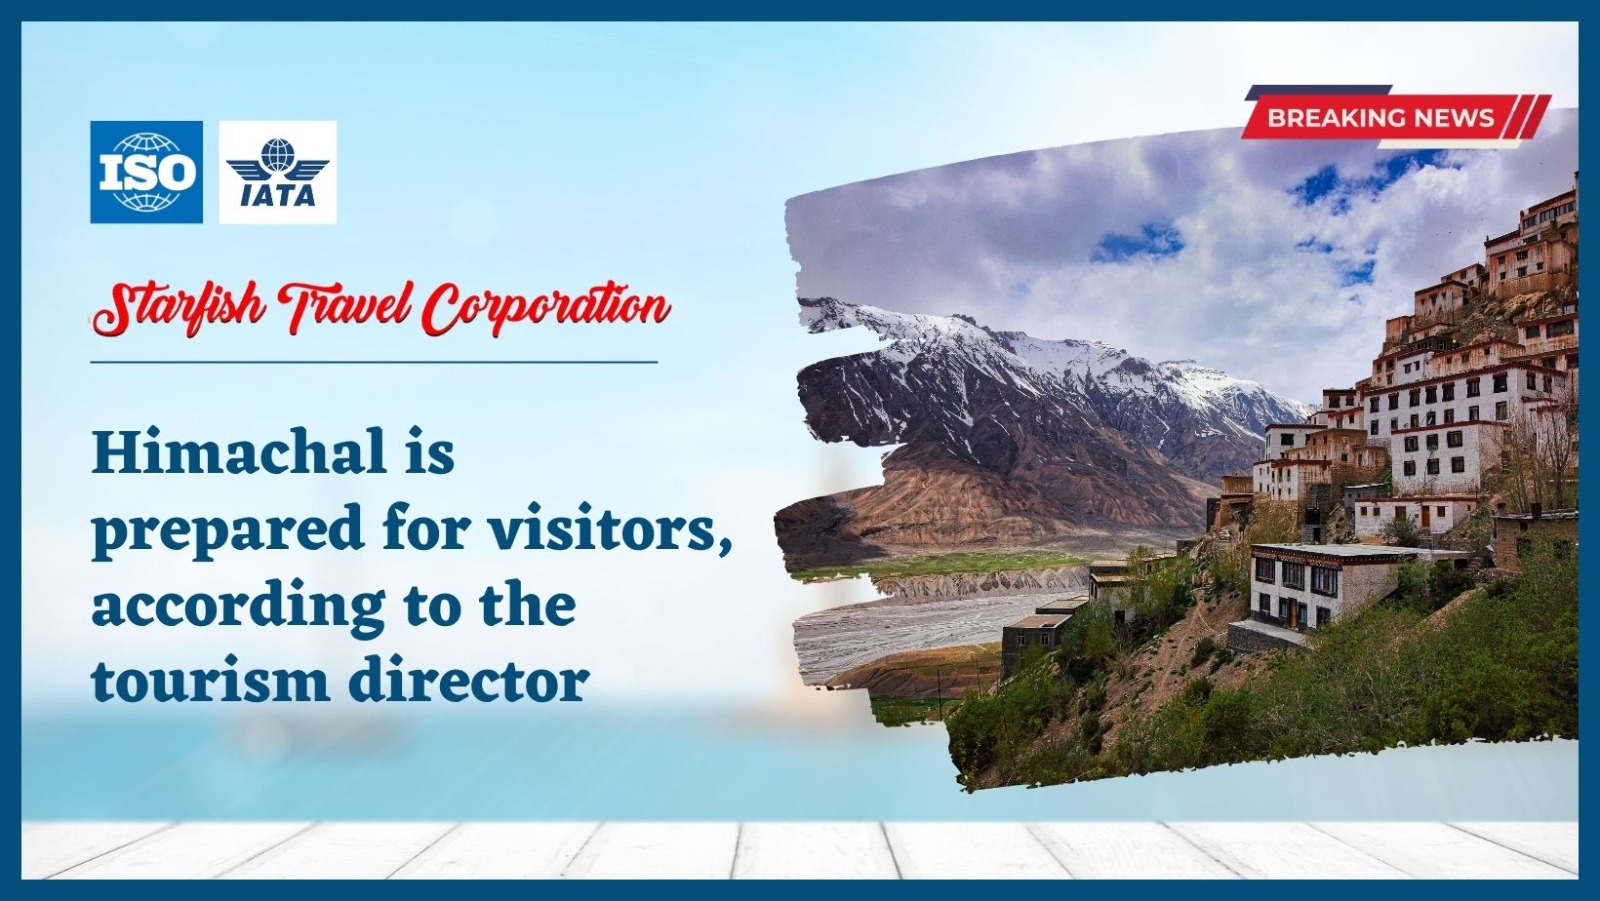 Himachal is prepared for visitors, according to the tourism director